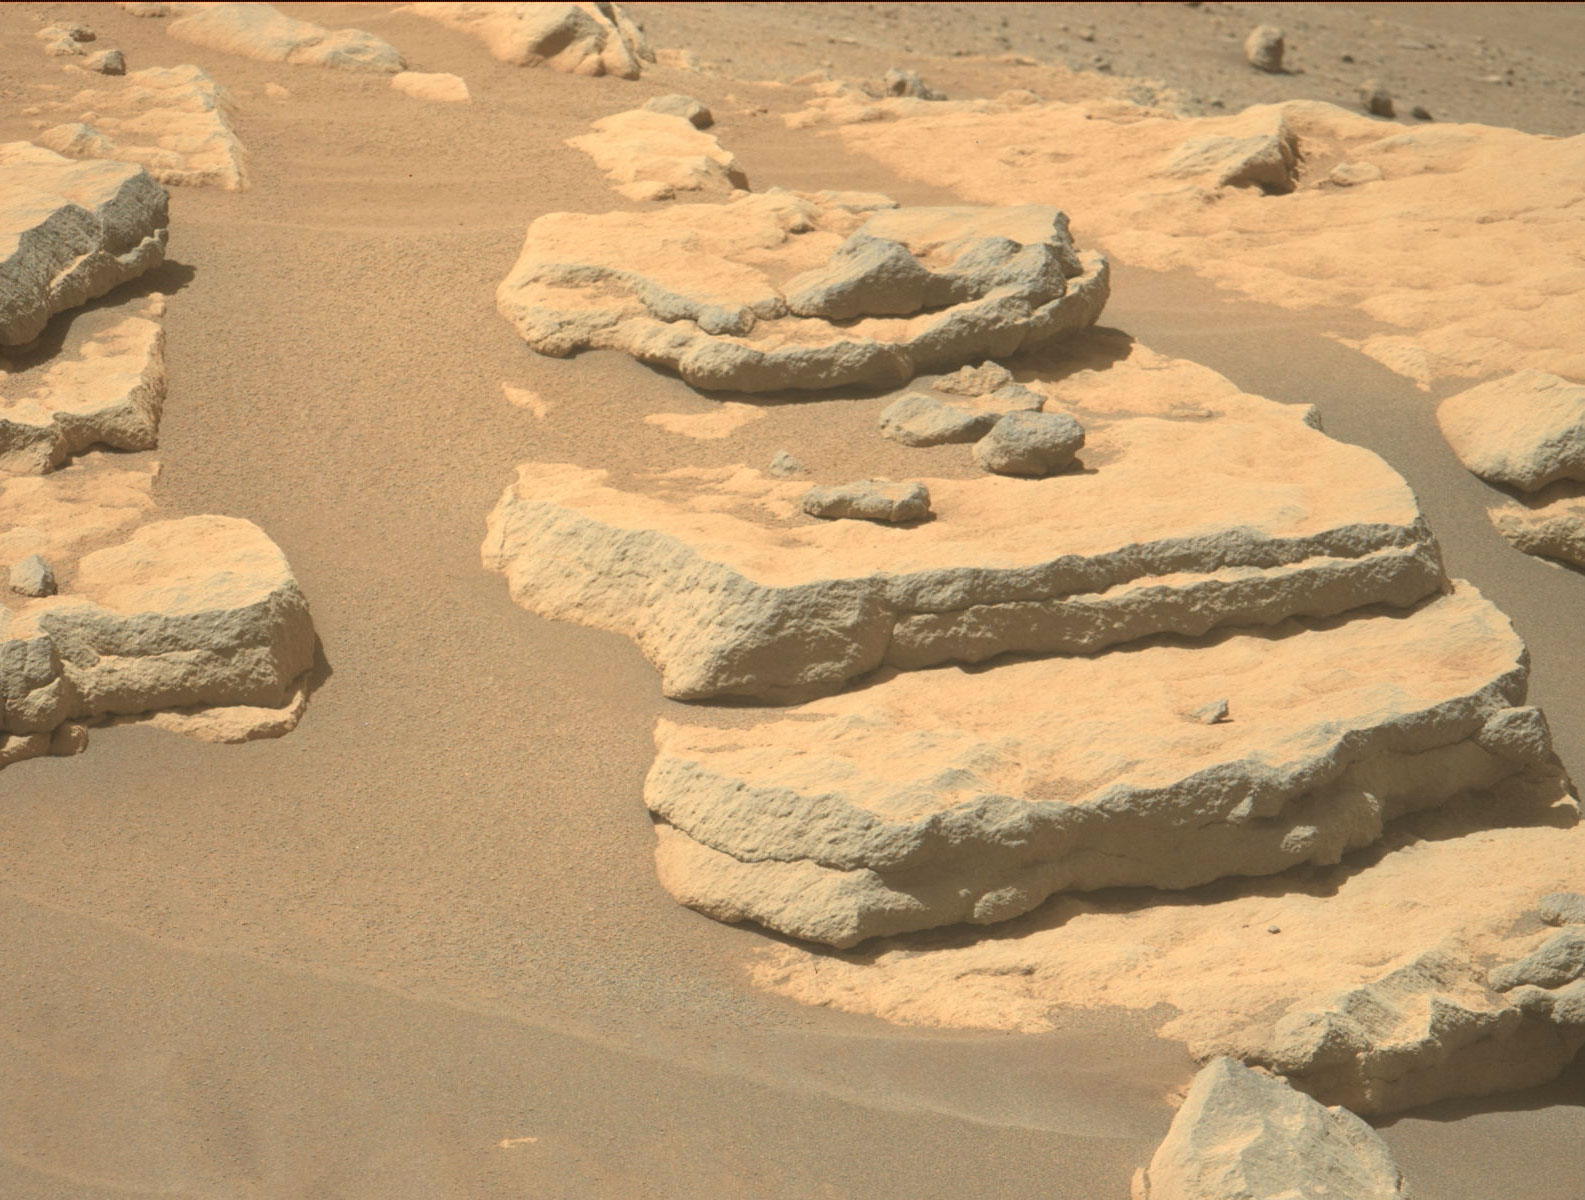 NASA's Mars Perseverance rover acquired this image using its Left Mastcam-Z camera. The image shows the terrain of Mars with some rocky soil.